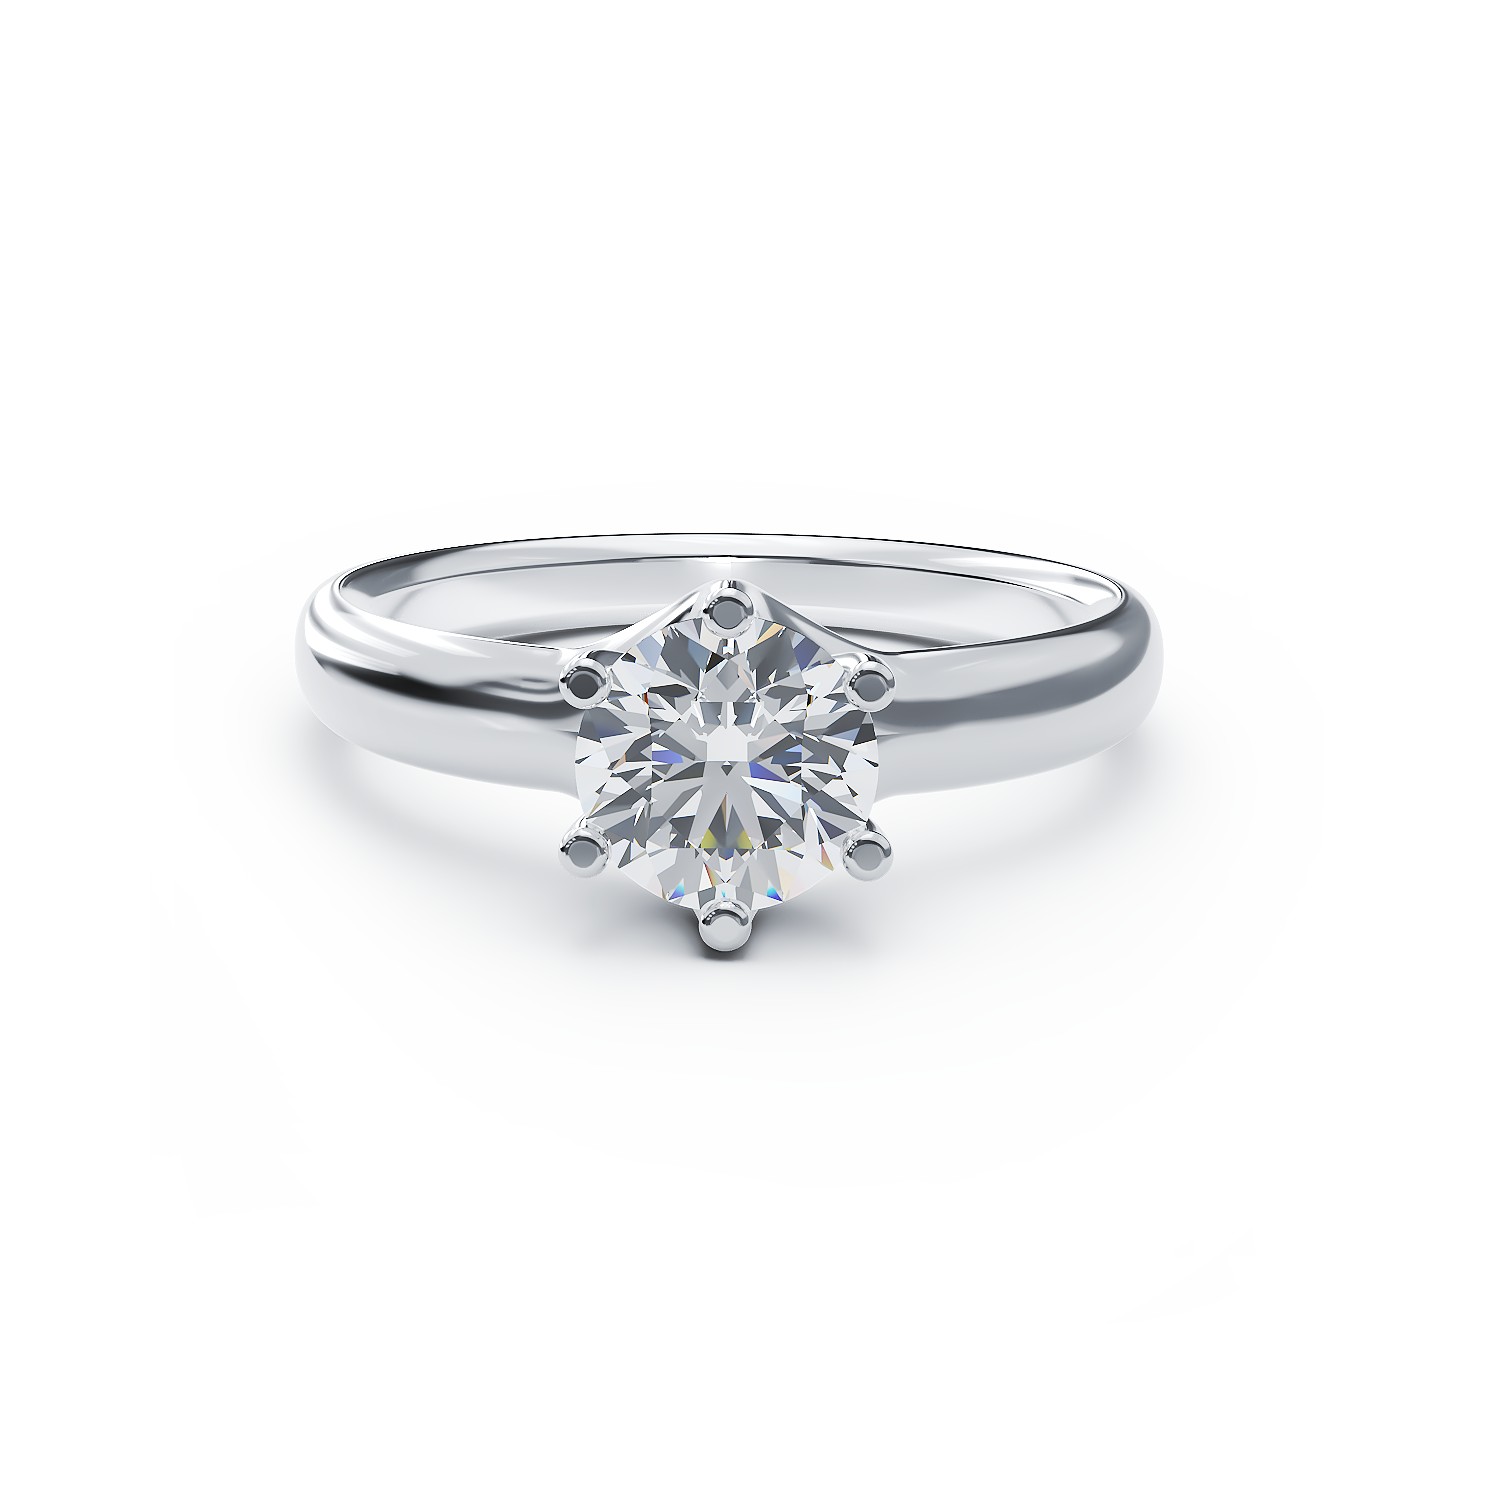 18K white gold engagement ring with a 1ct solitaire diamond